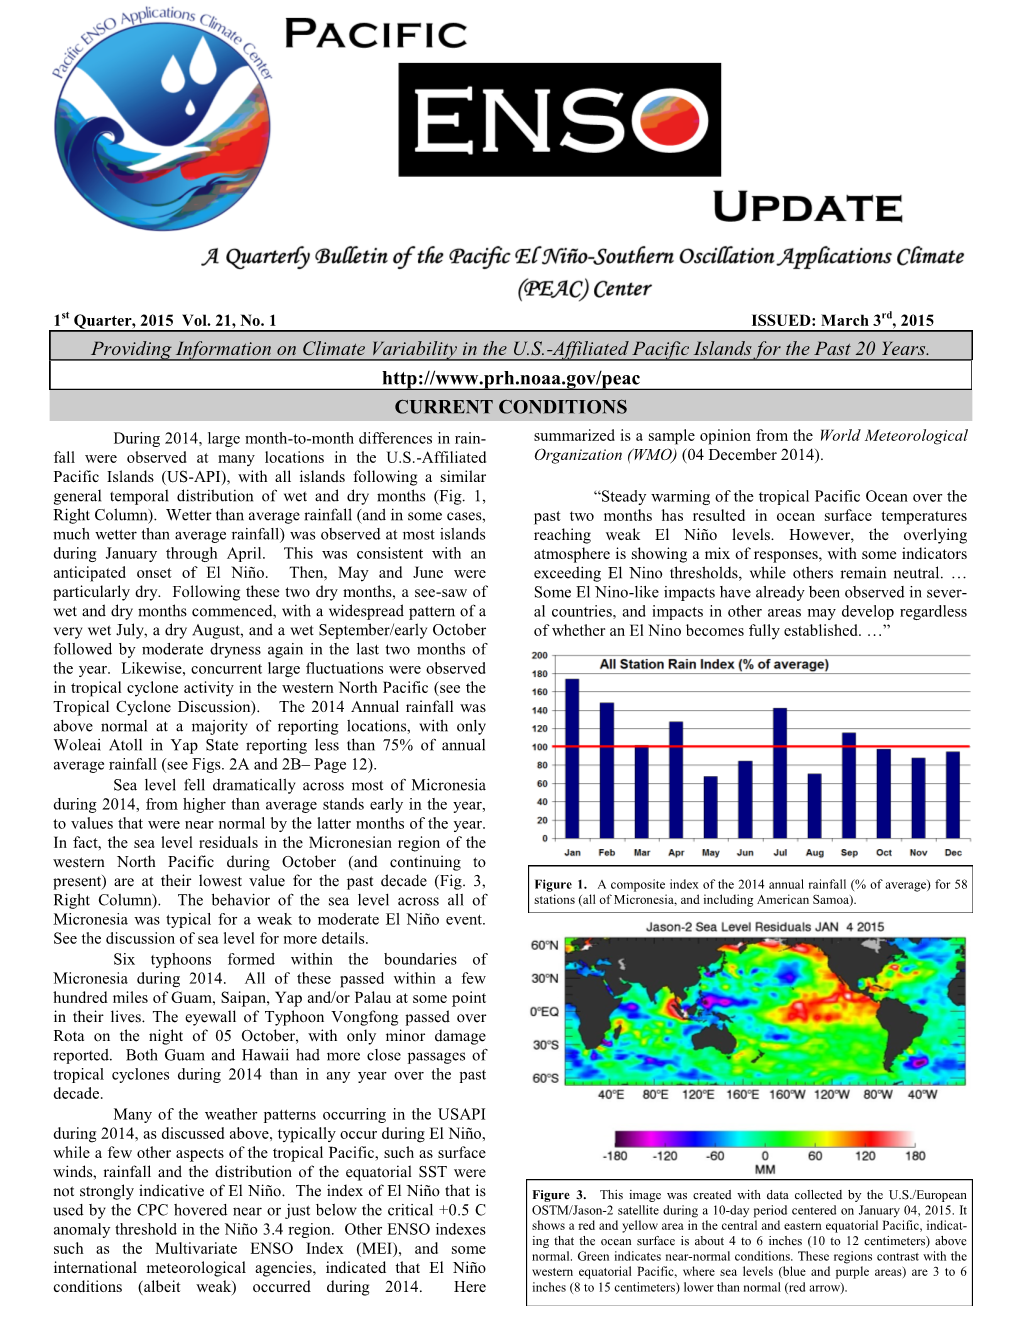 Pacific ENSO Update: 1St Quarter 2015